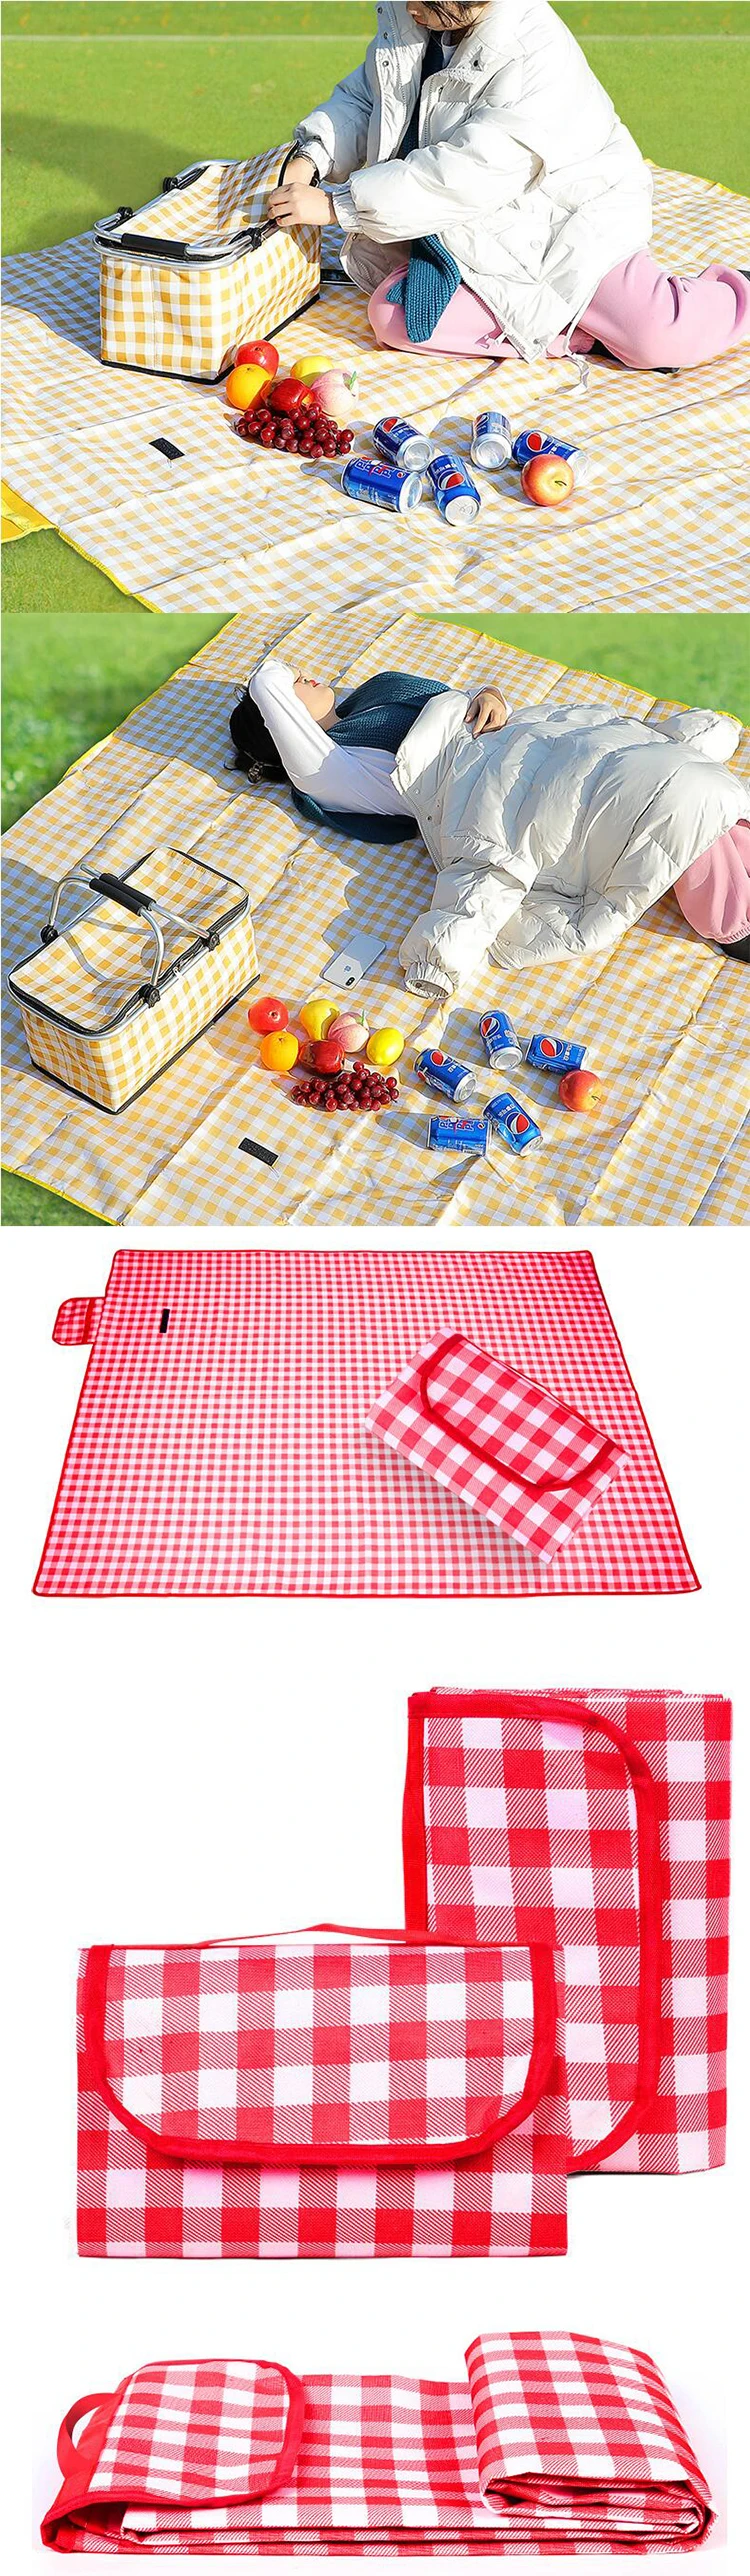 Custom logo Newest Outdoor Sand Proof Waterproof Portable Picnic Blanket for Camping Hiking Festivals